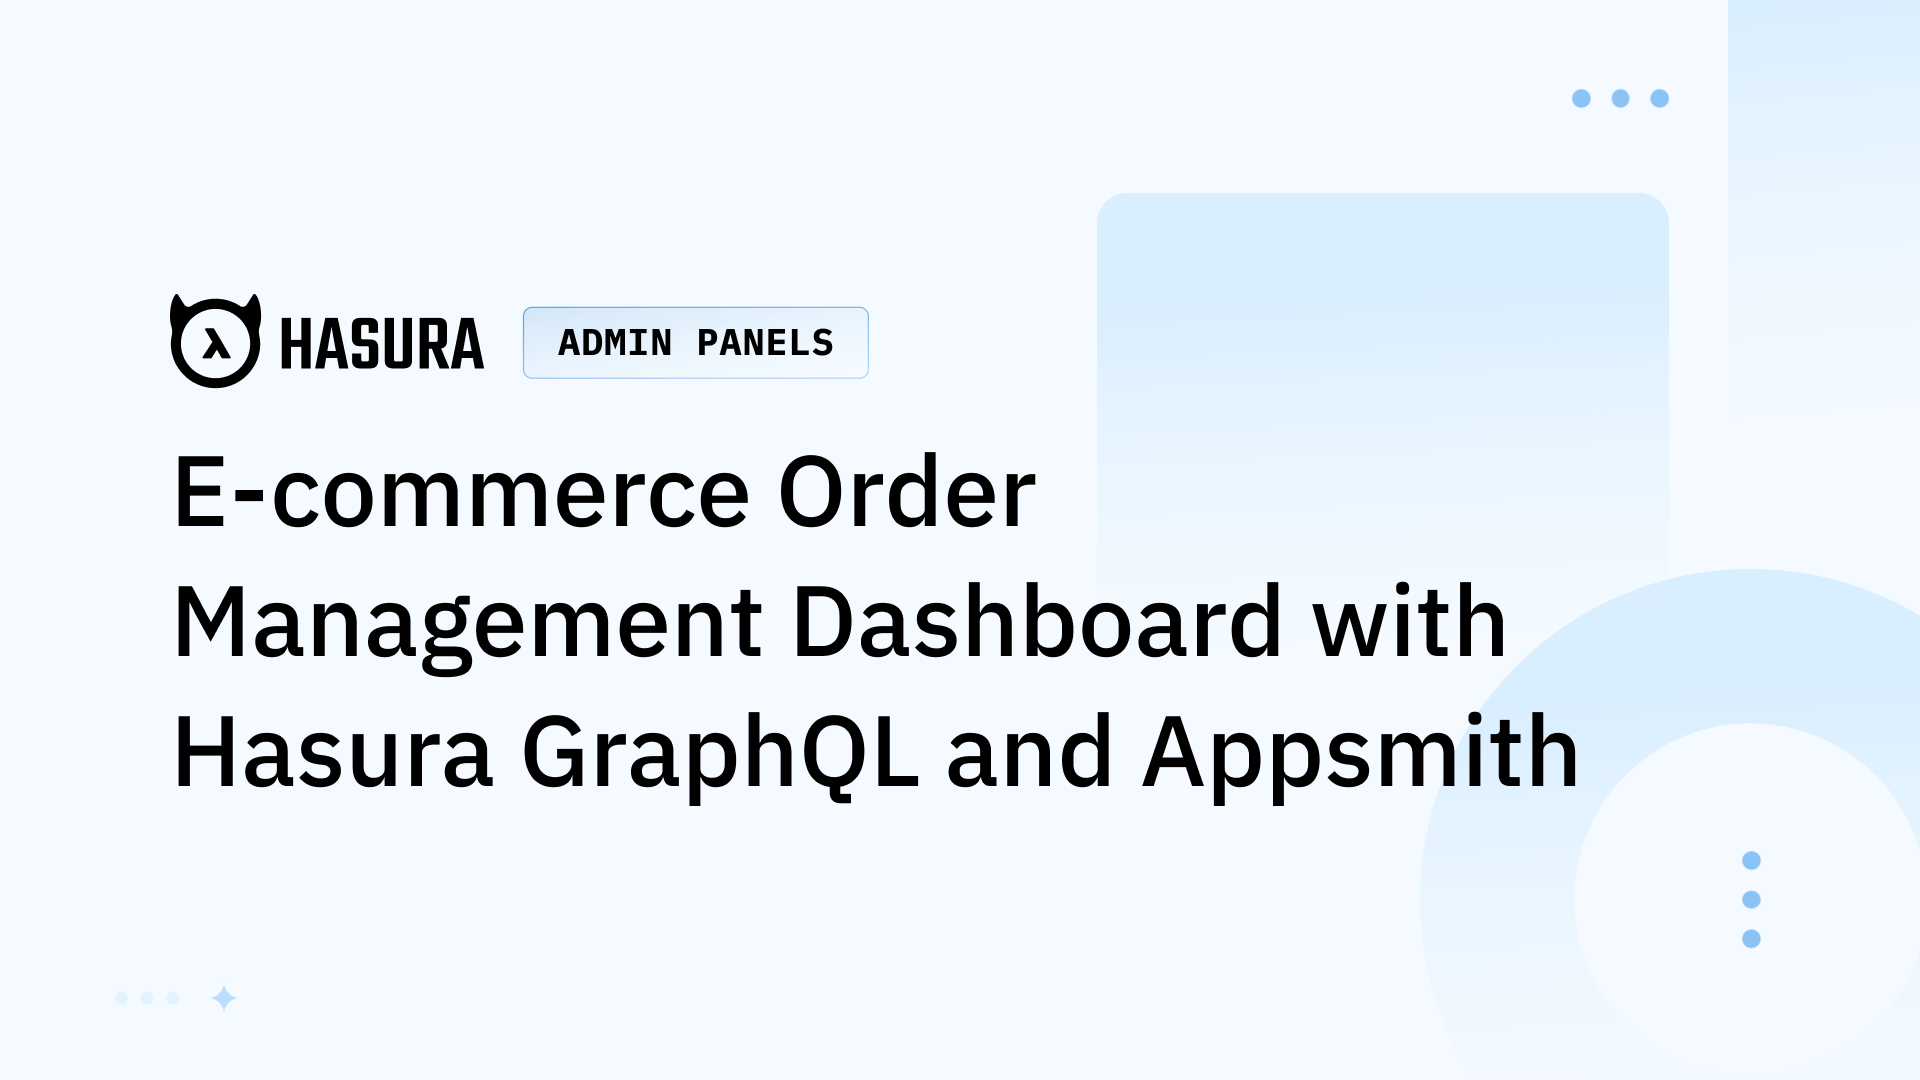 E-commerce Order Management Dashboard with Hasura GraphQL and Appsmith